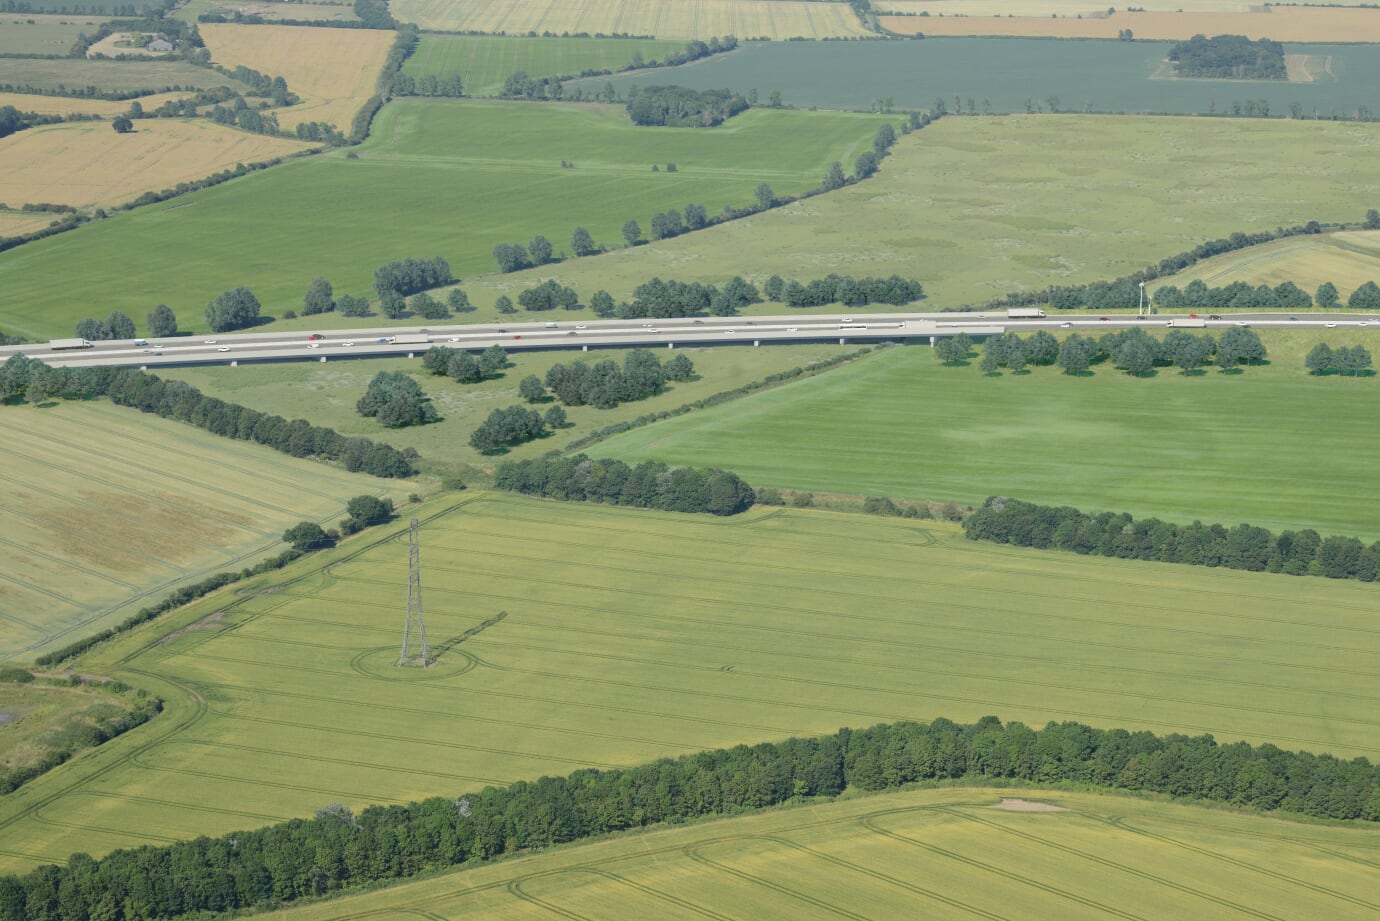 How the Lower Thames Crossing viaduct over the Mardyke Valley will look